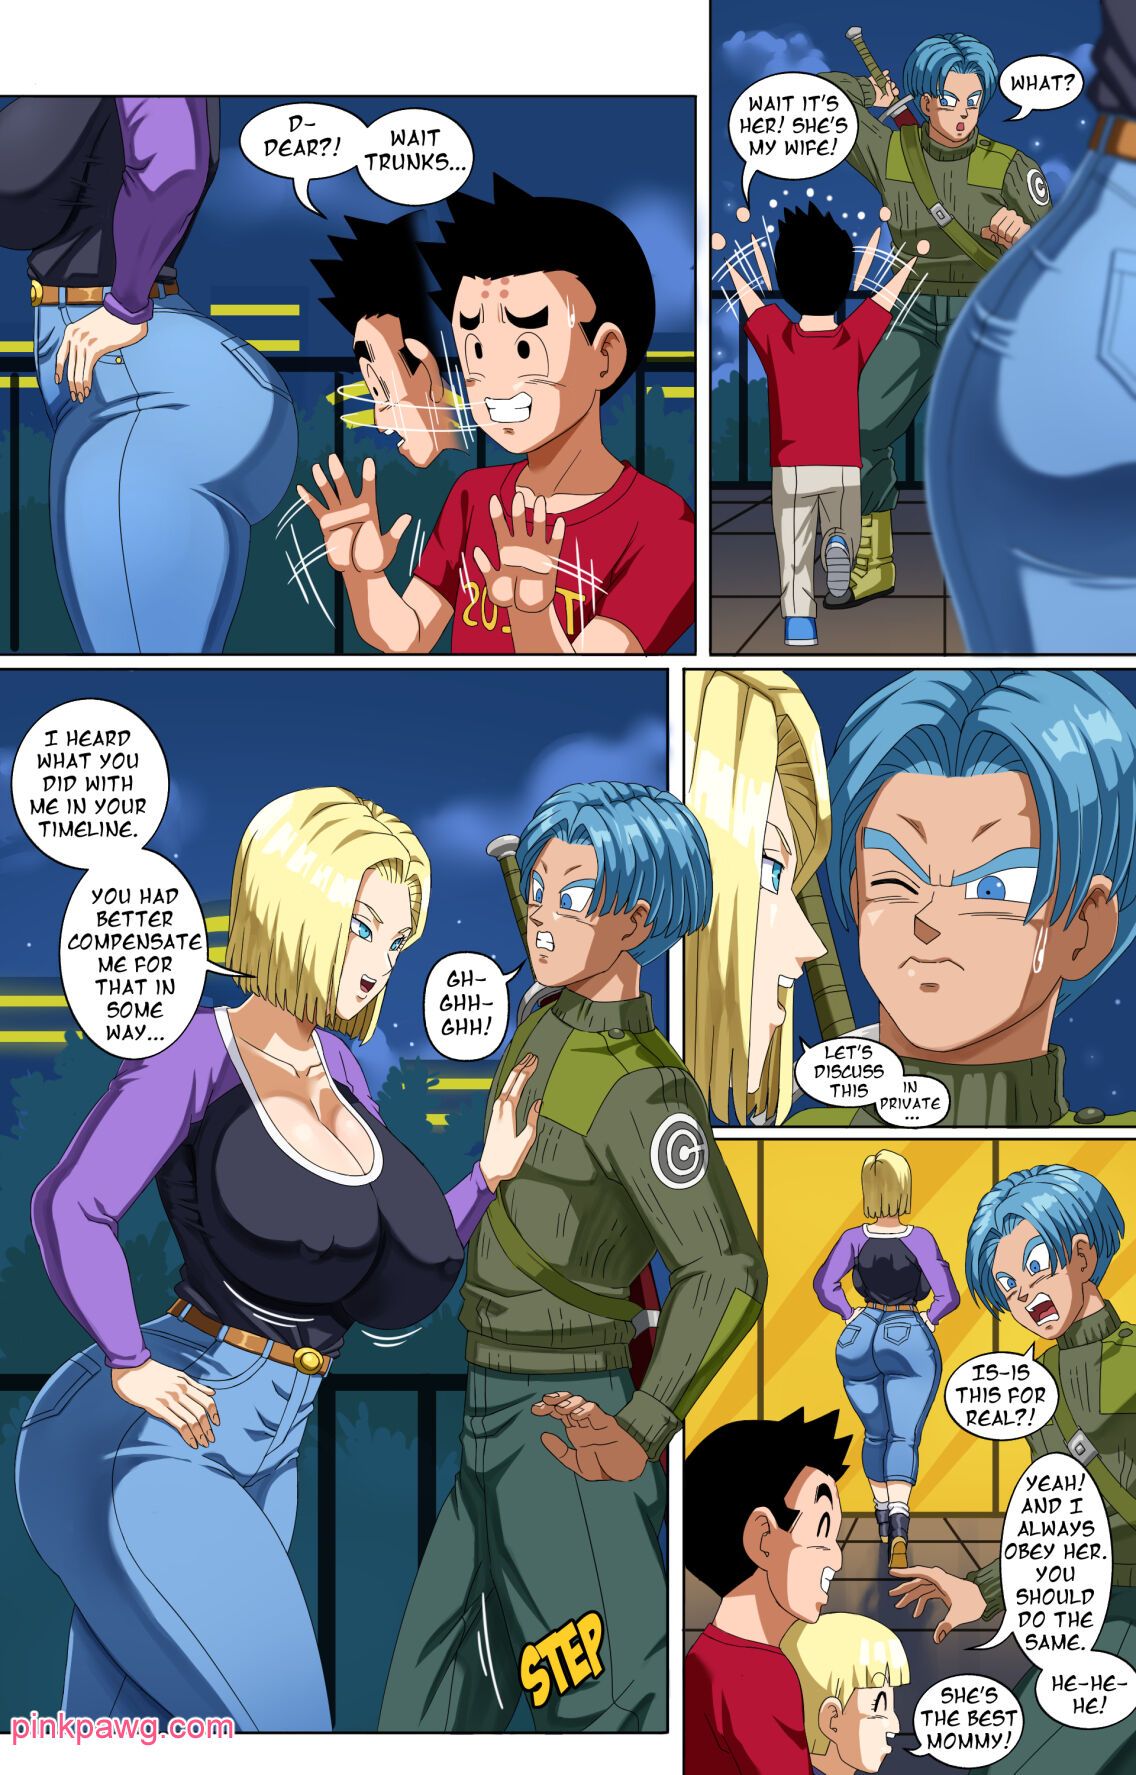 Android 18 Porn Comic - Android 18 and Trunks By PinkPawg Porn Comic english 02 - Porn Comic